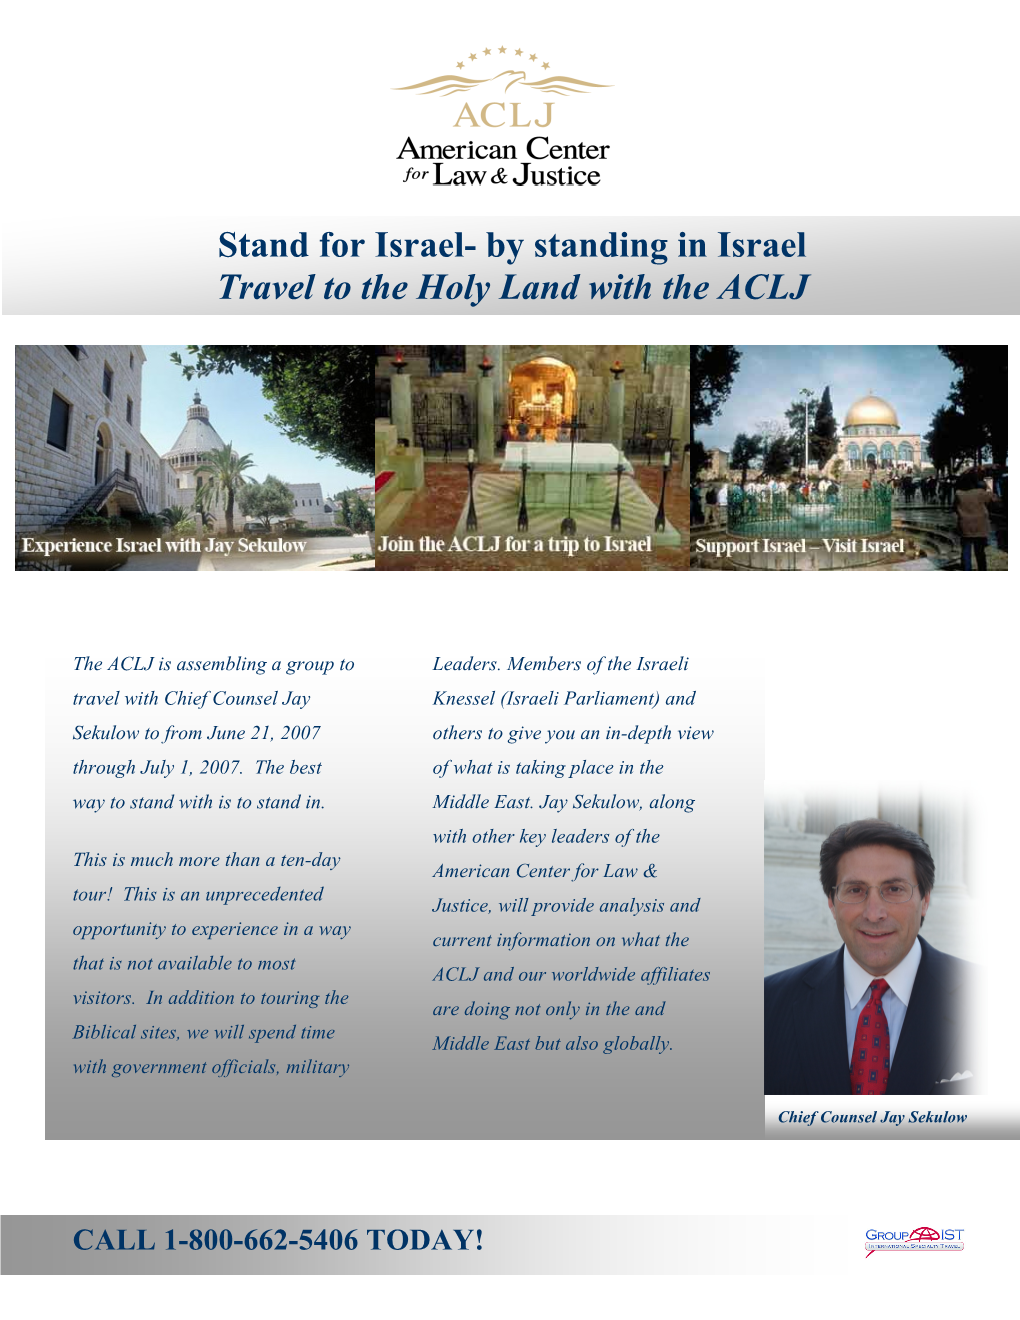 Stand for Israel- by Standing in Israel Travel to the Holy Land with the ACLJ